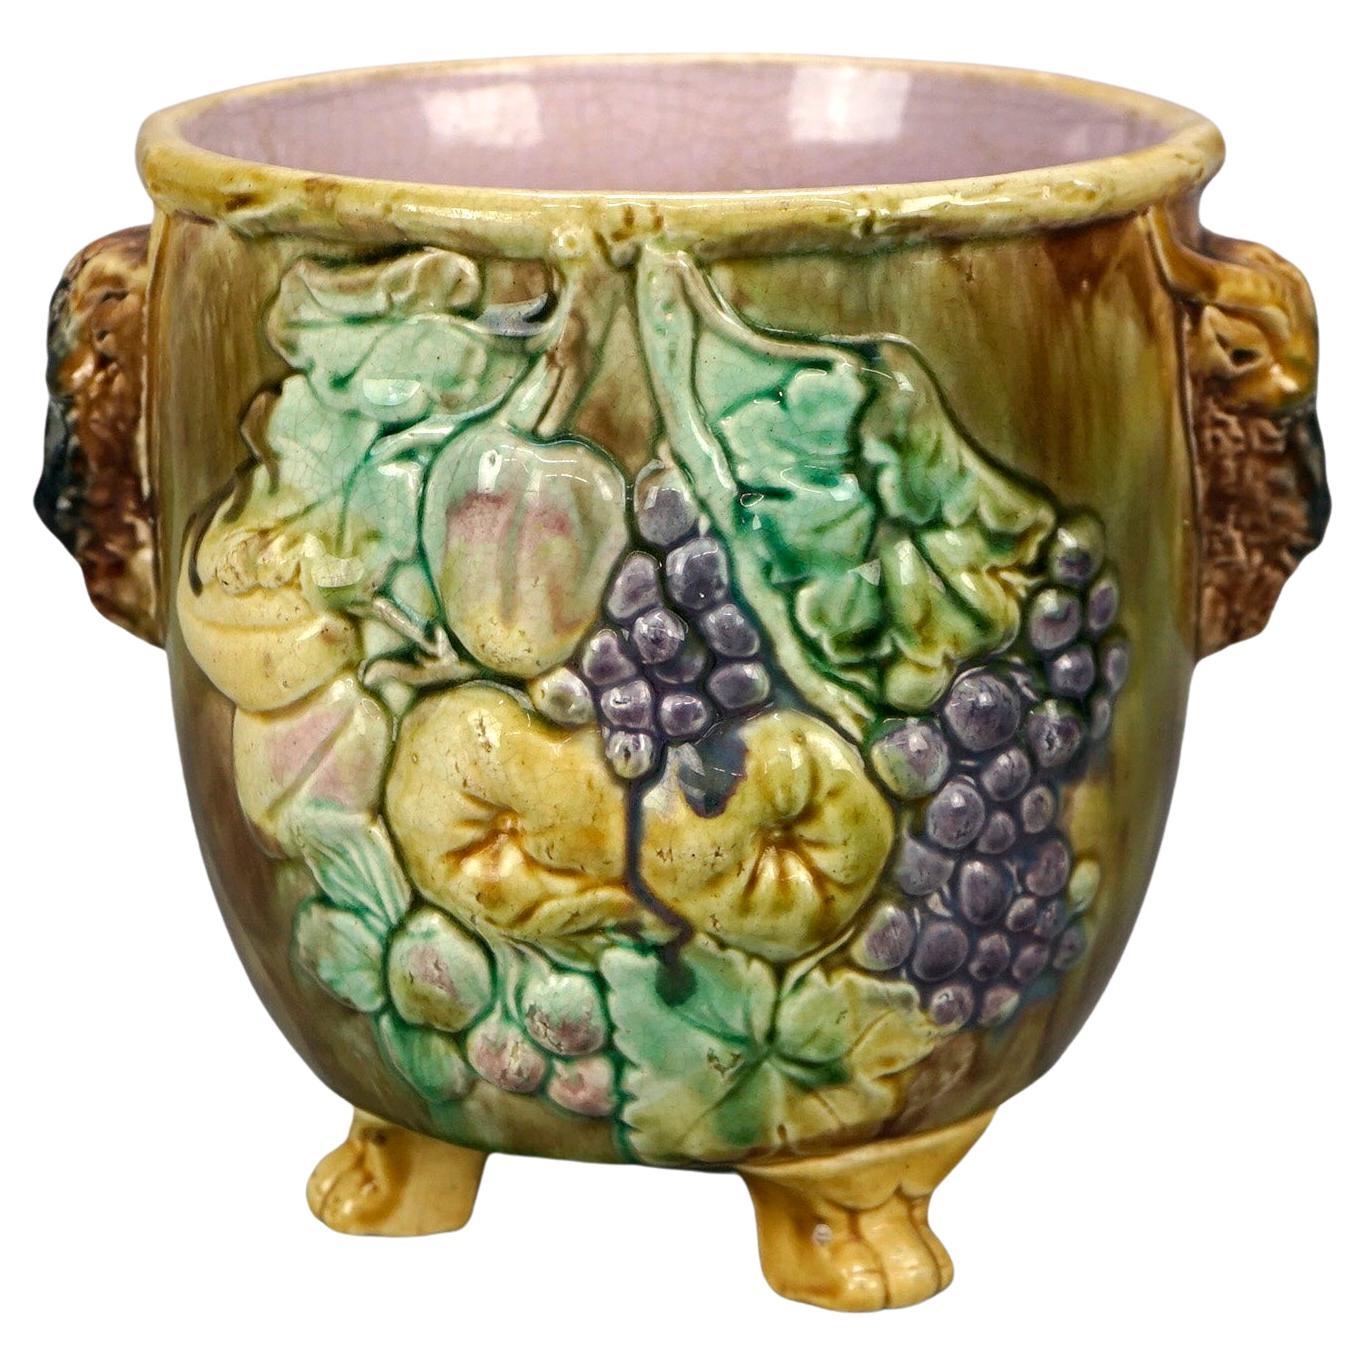  Antique English Majolica Figural Handled & Footed Jardiniere with Fruit 19th C For Sale